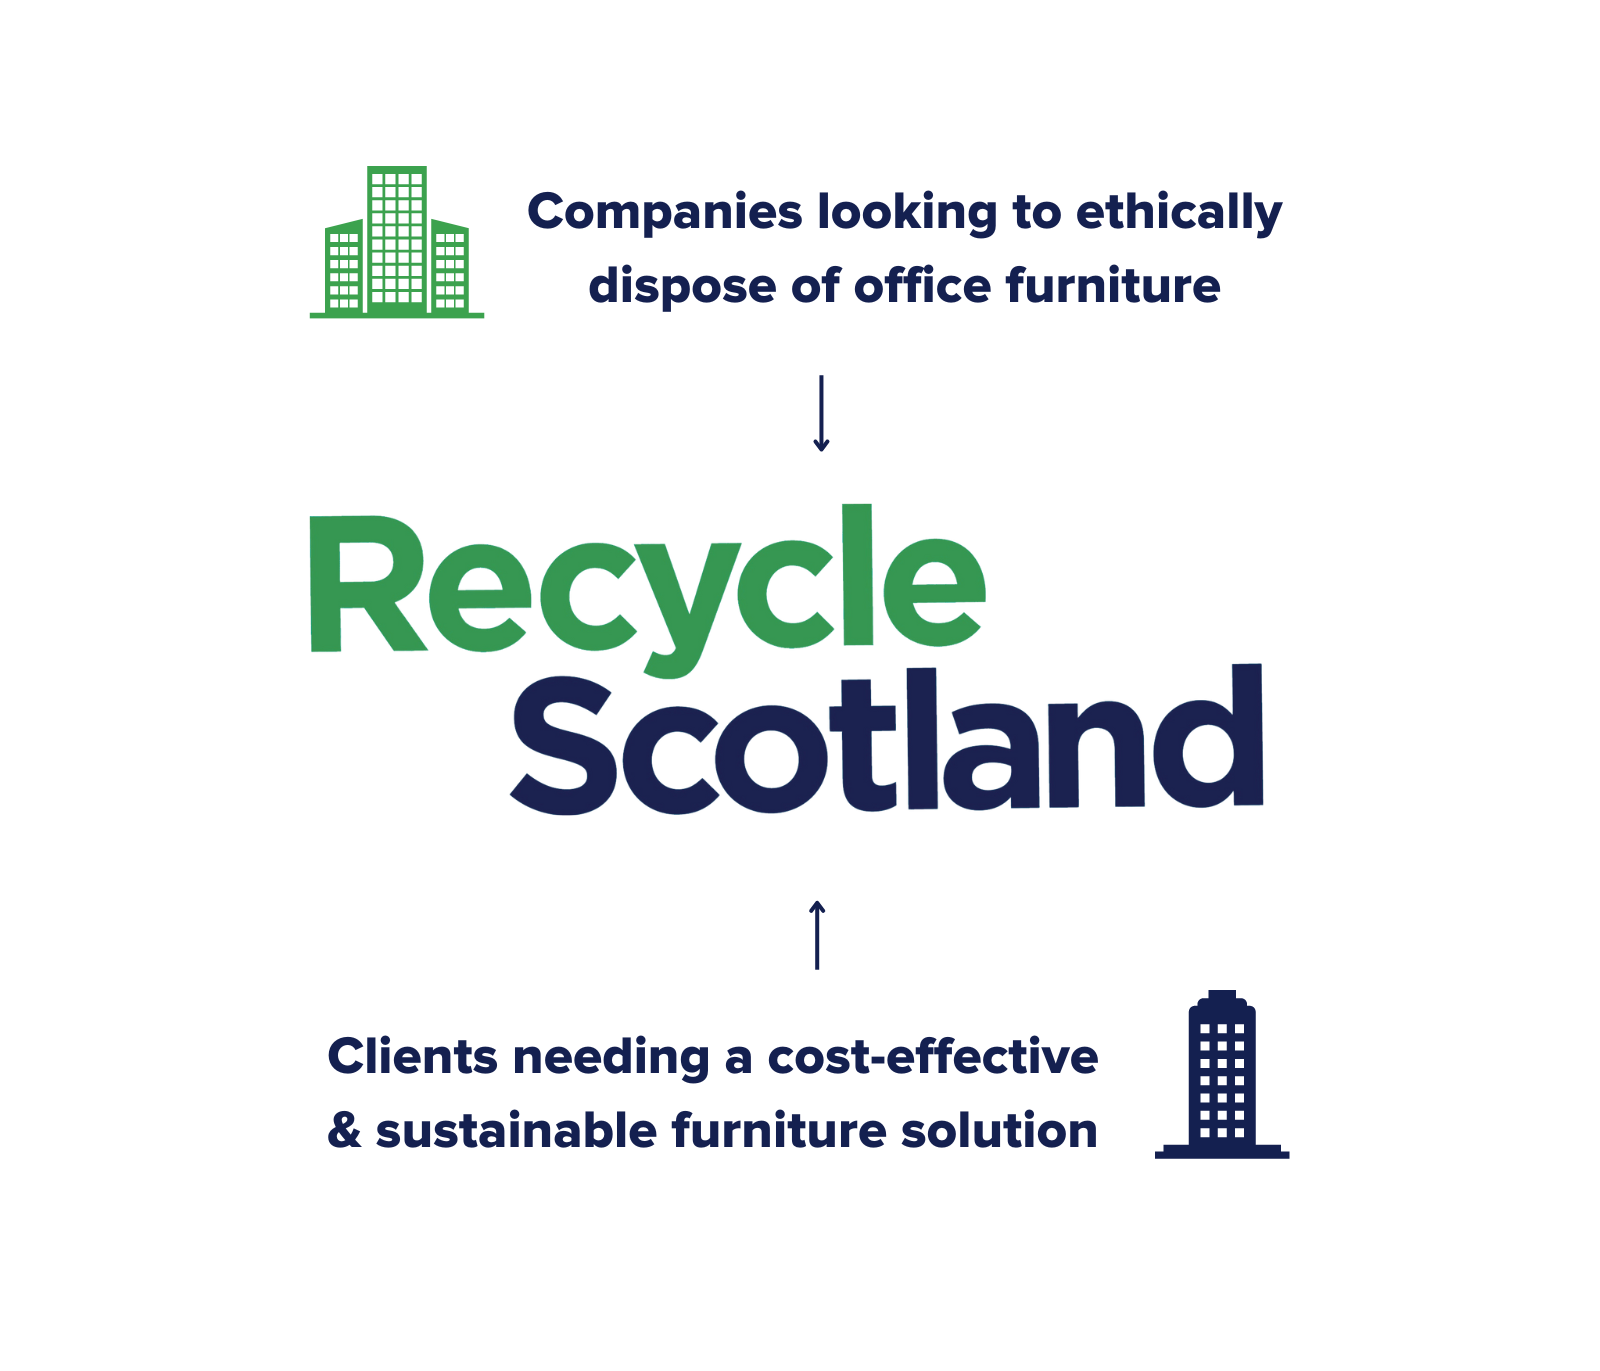 Corporate Moves Recycle Scotland